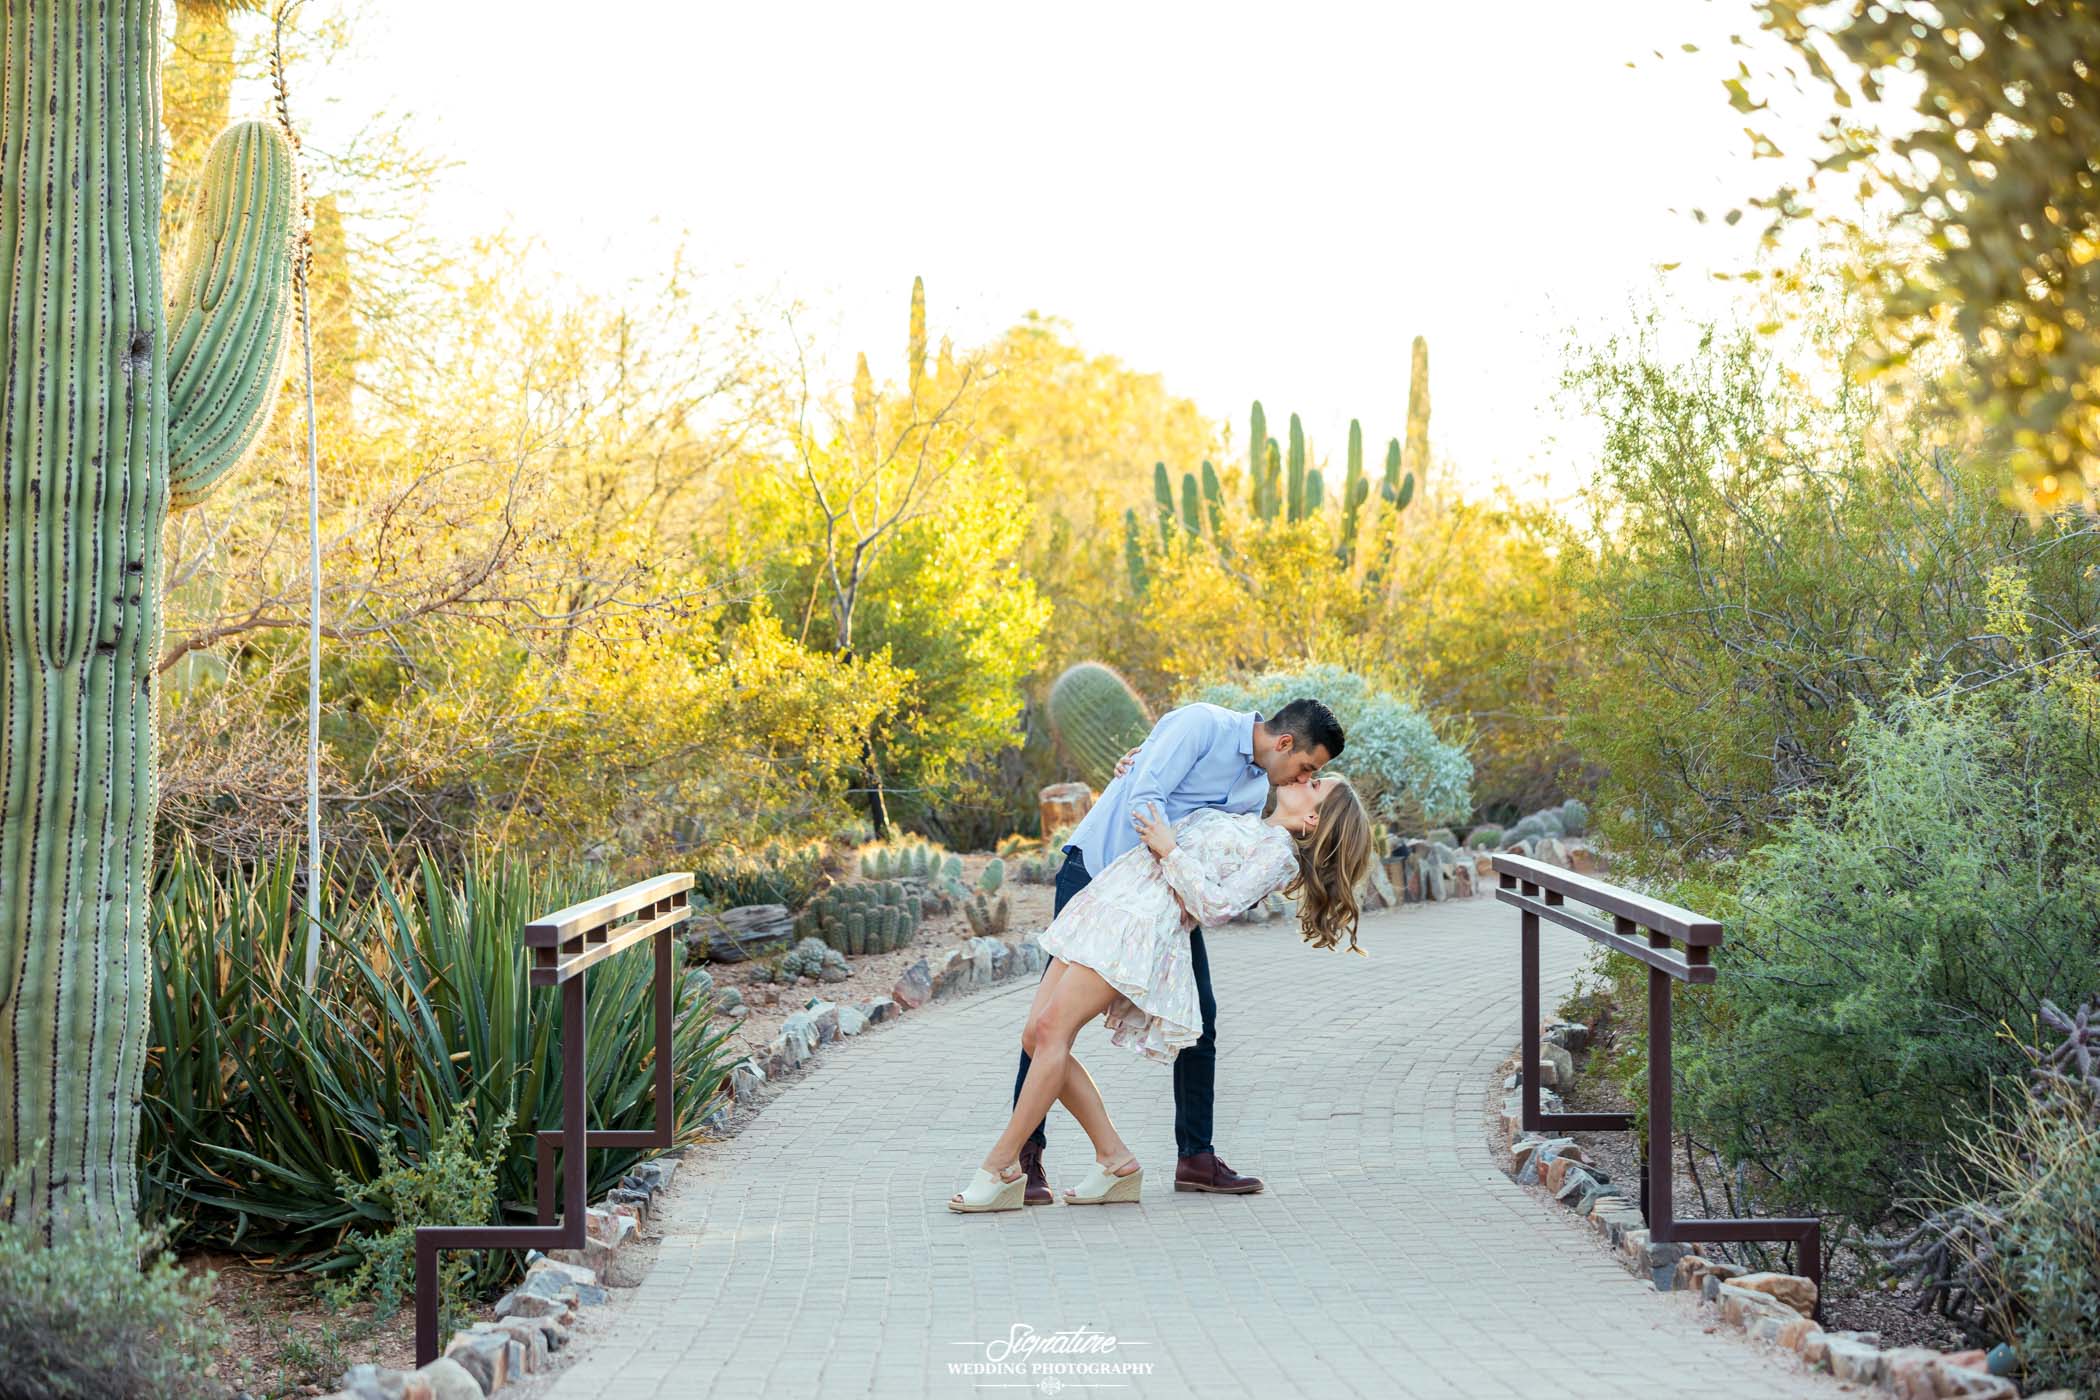 Couple kissing and dipping outside with desert plants